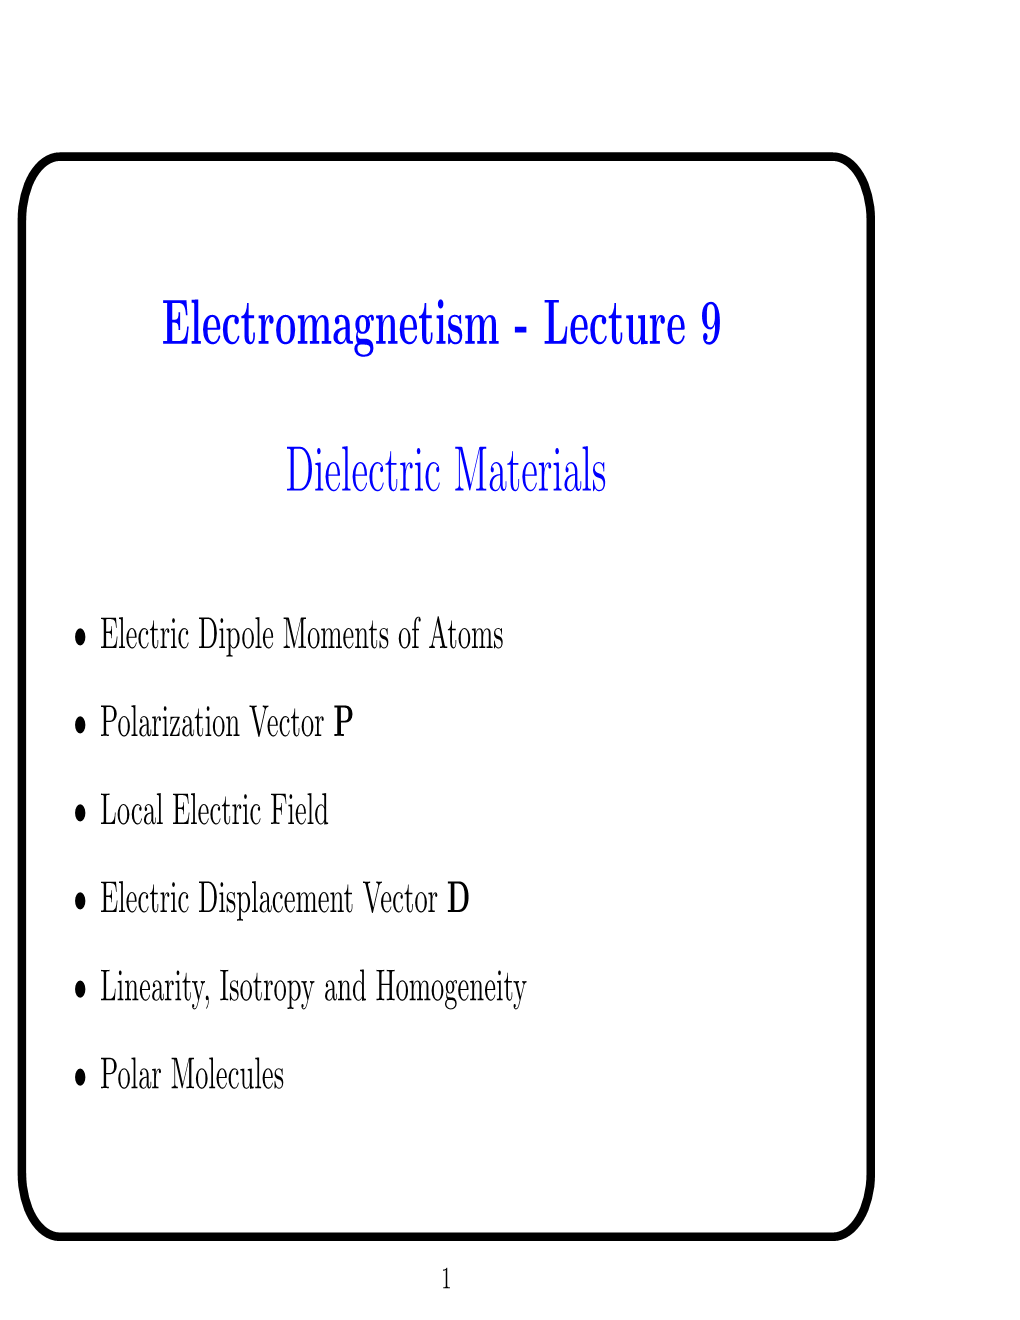 Electromagnetism - Lecture 9